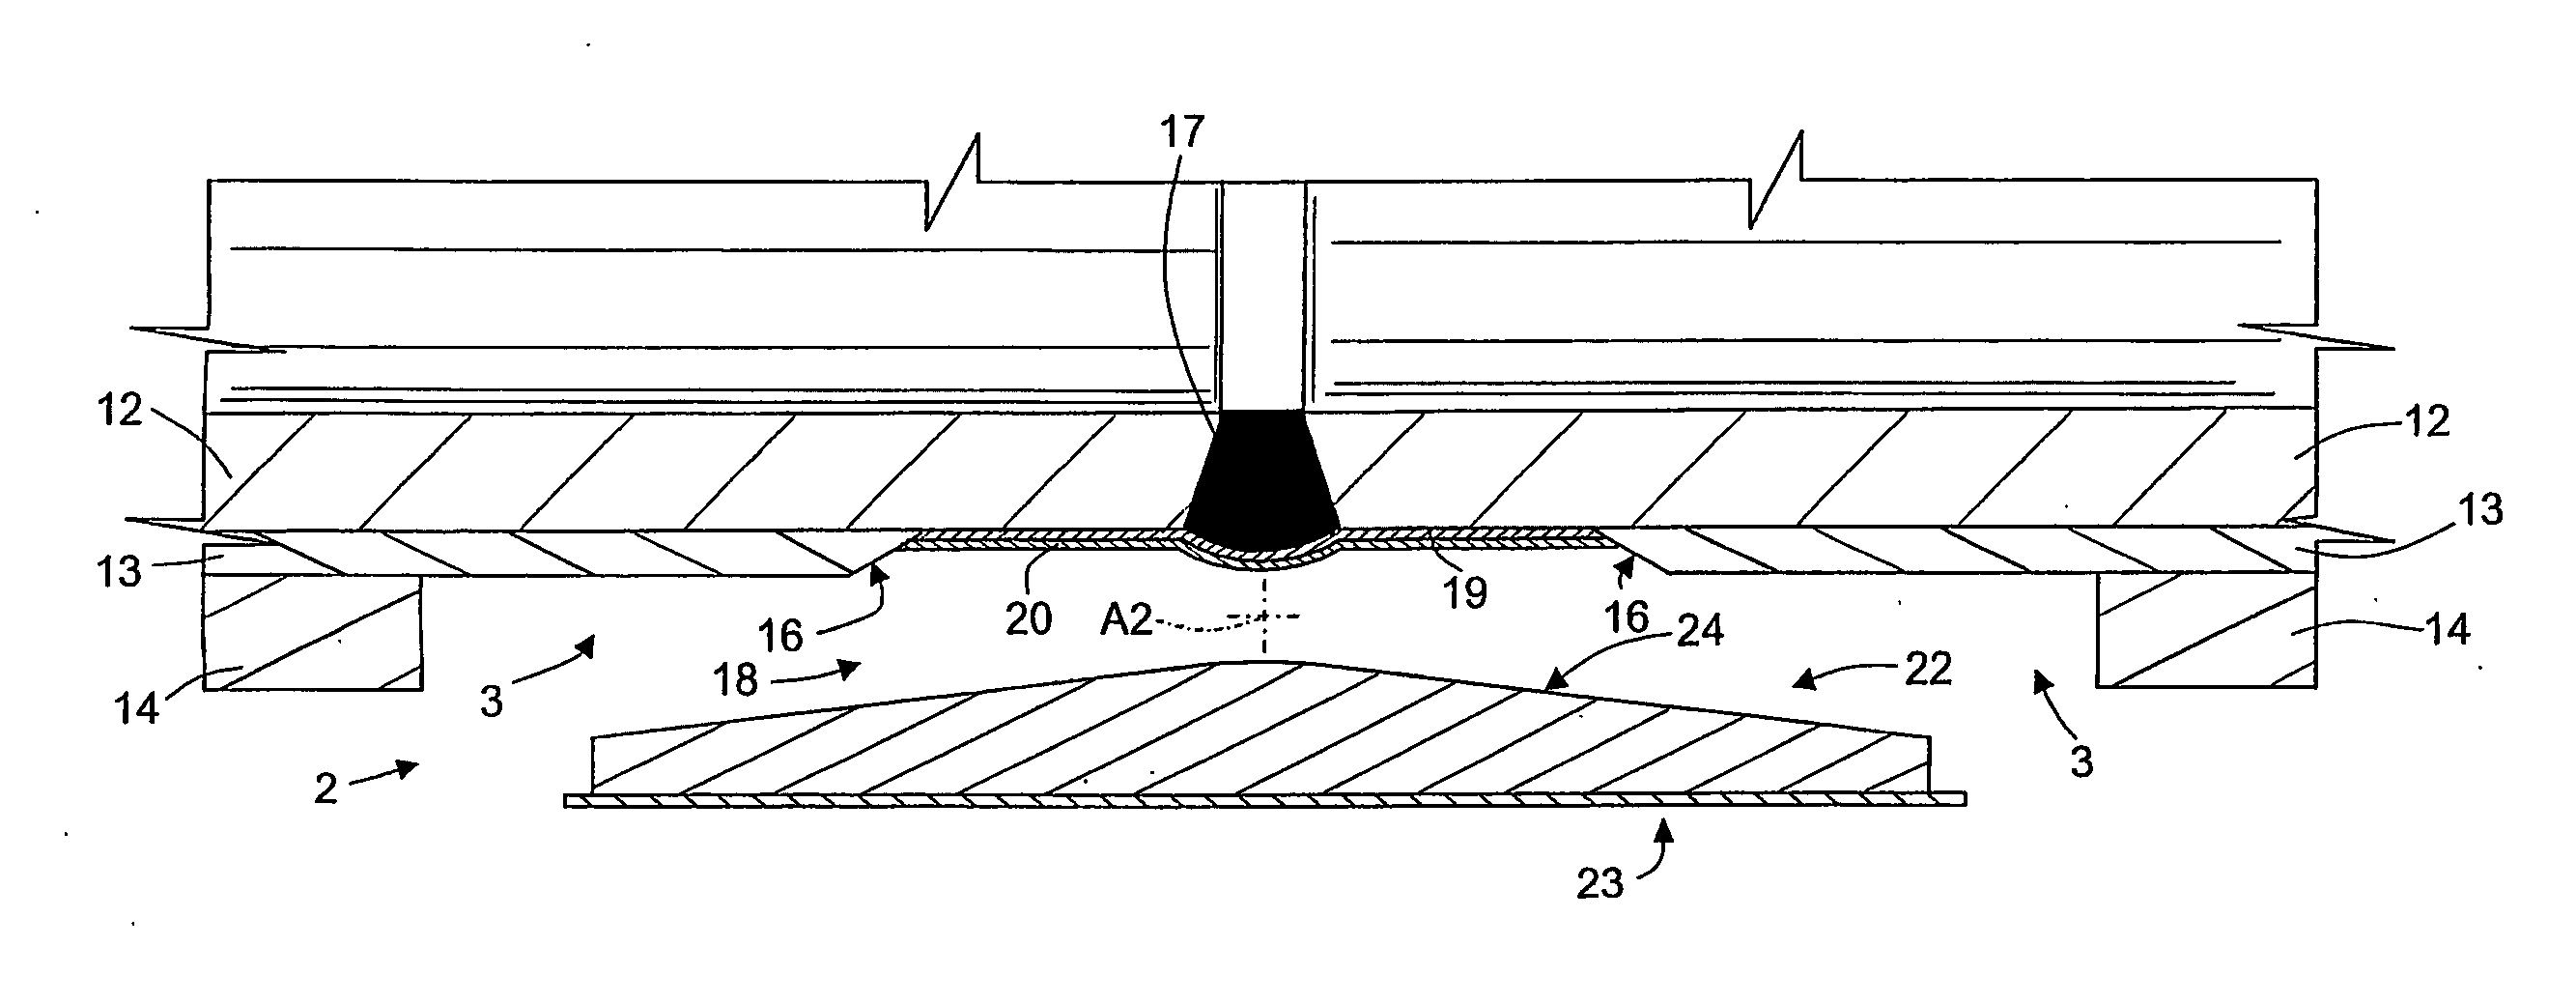 Method for forming a protective coat about a cutback between pipes forming part of an underwater pipeline